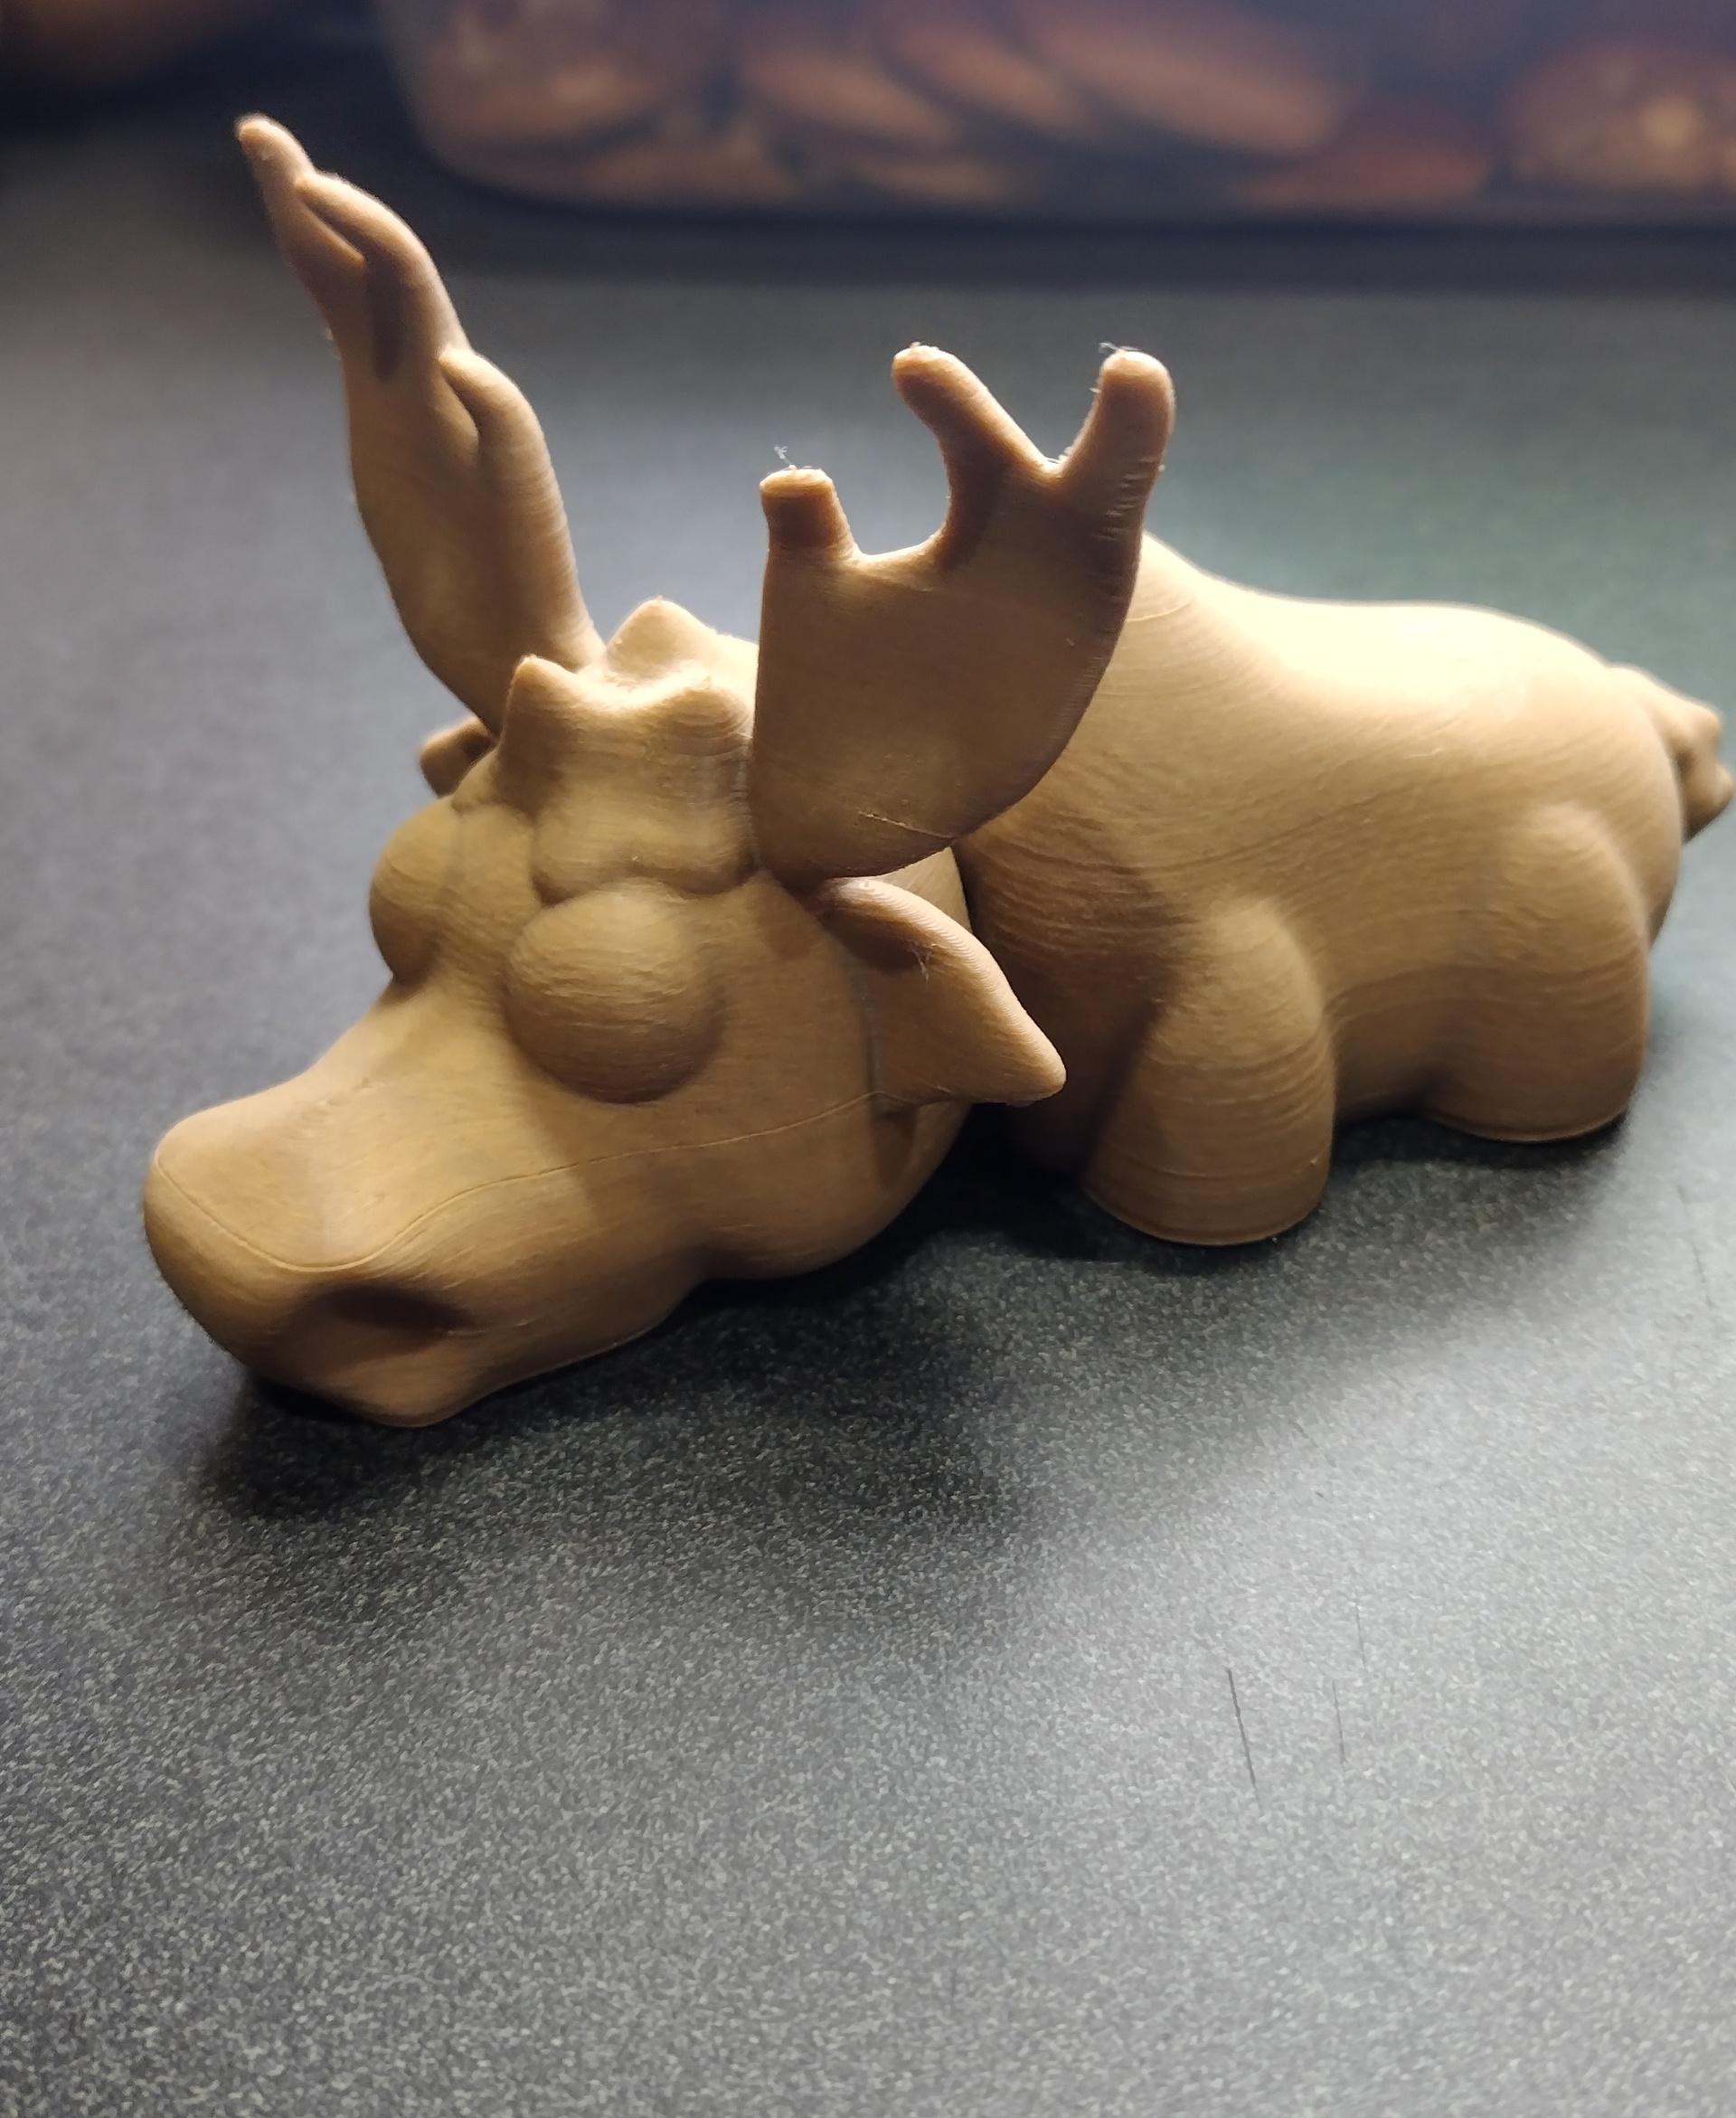 Flexi Canadian Moose - Printed in Creality wood pla
Printed on Elegoo Neptune 4 pro
.2 layer height
200 nozzle temp
60 bed temp
250mms - 3d model